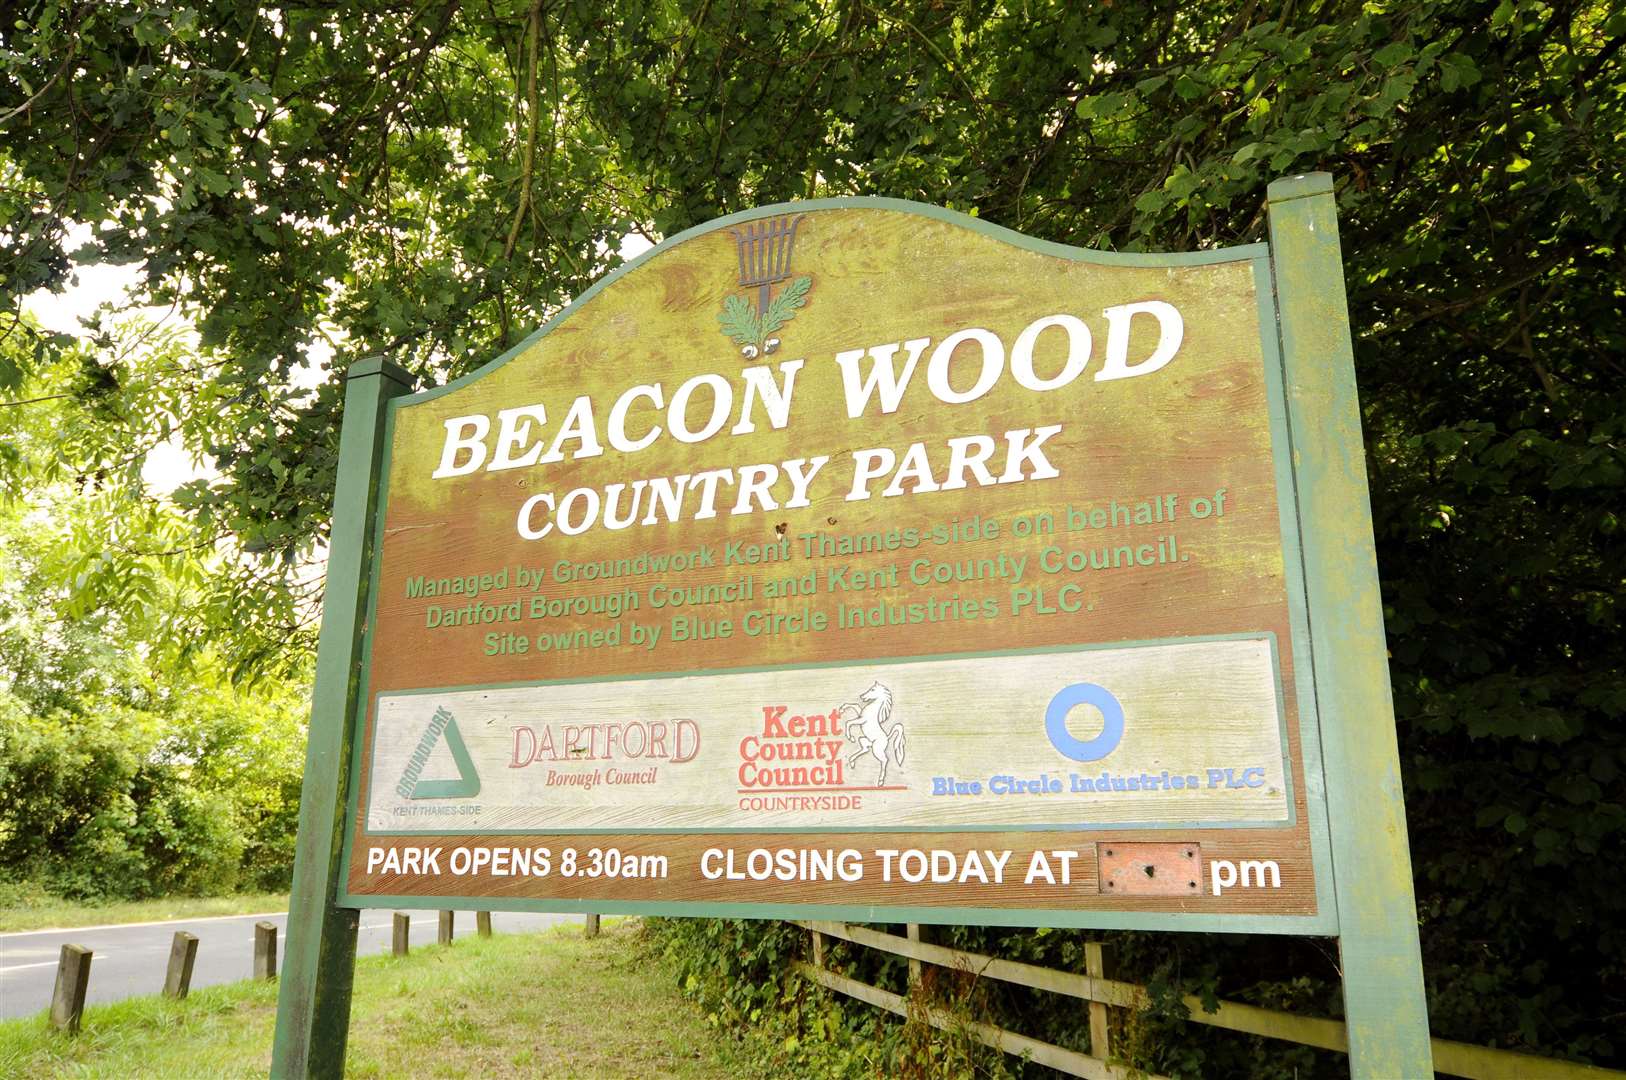 Scene of the attack: Beacon Wood Country Park